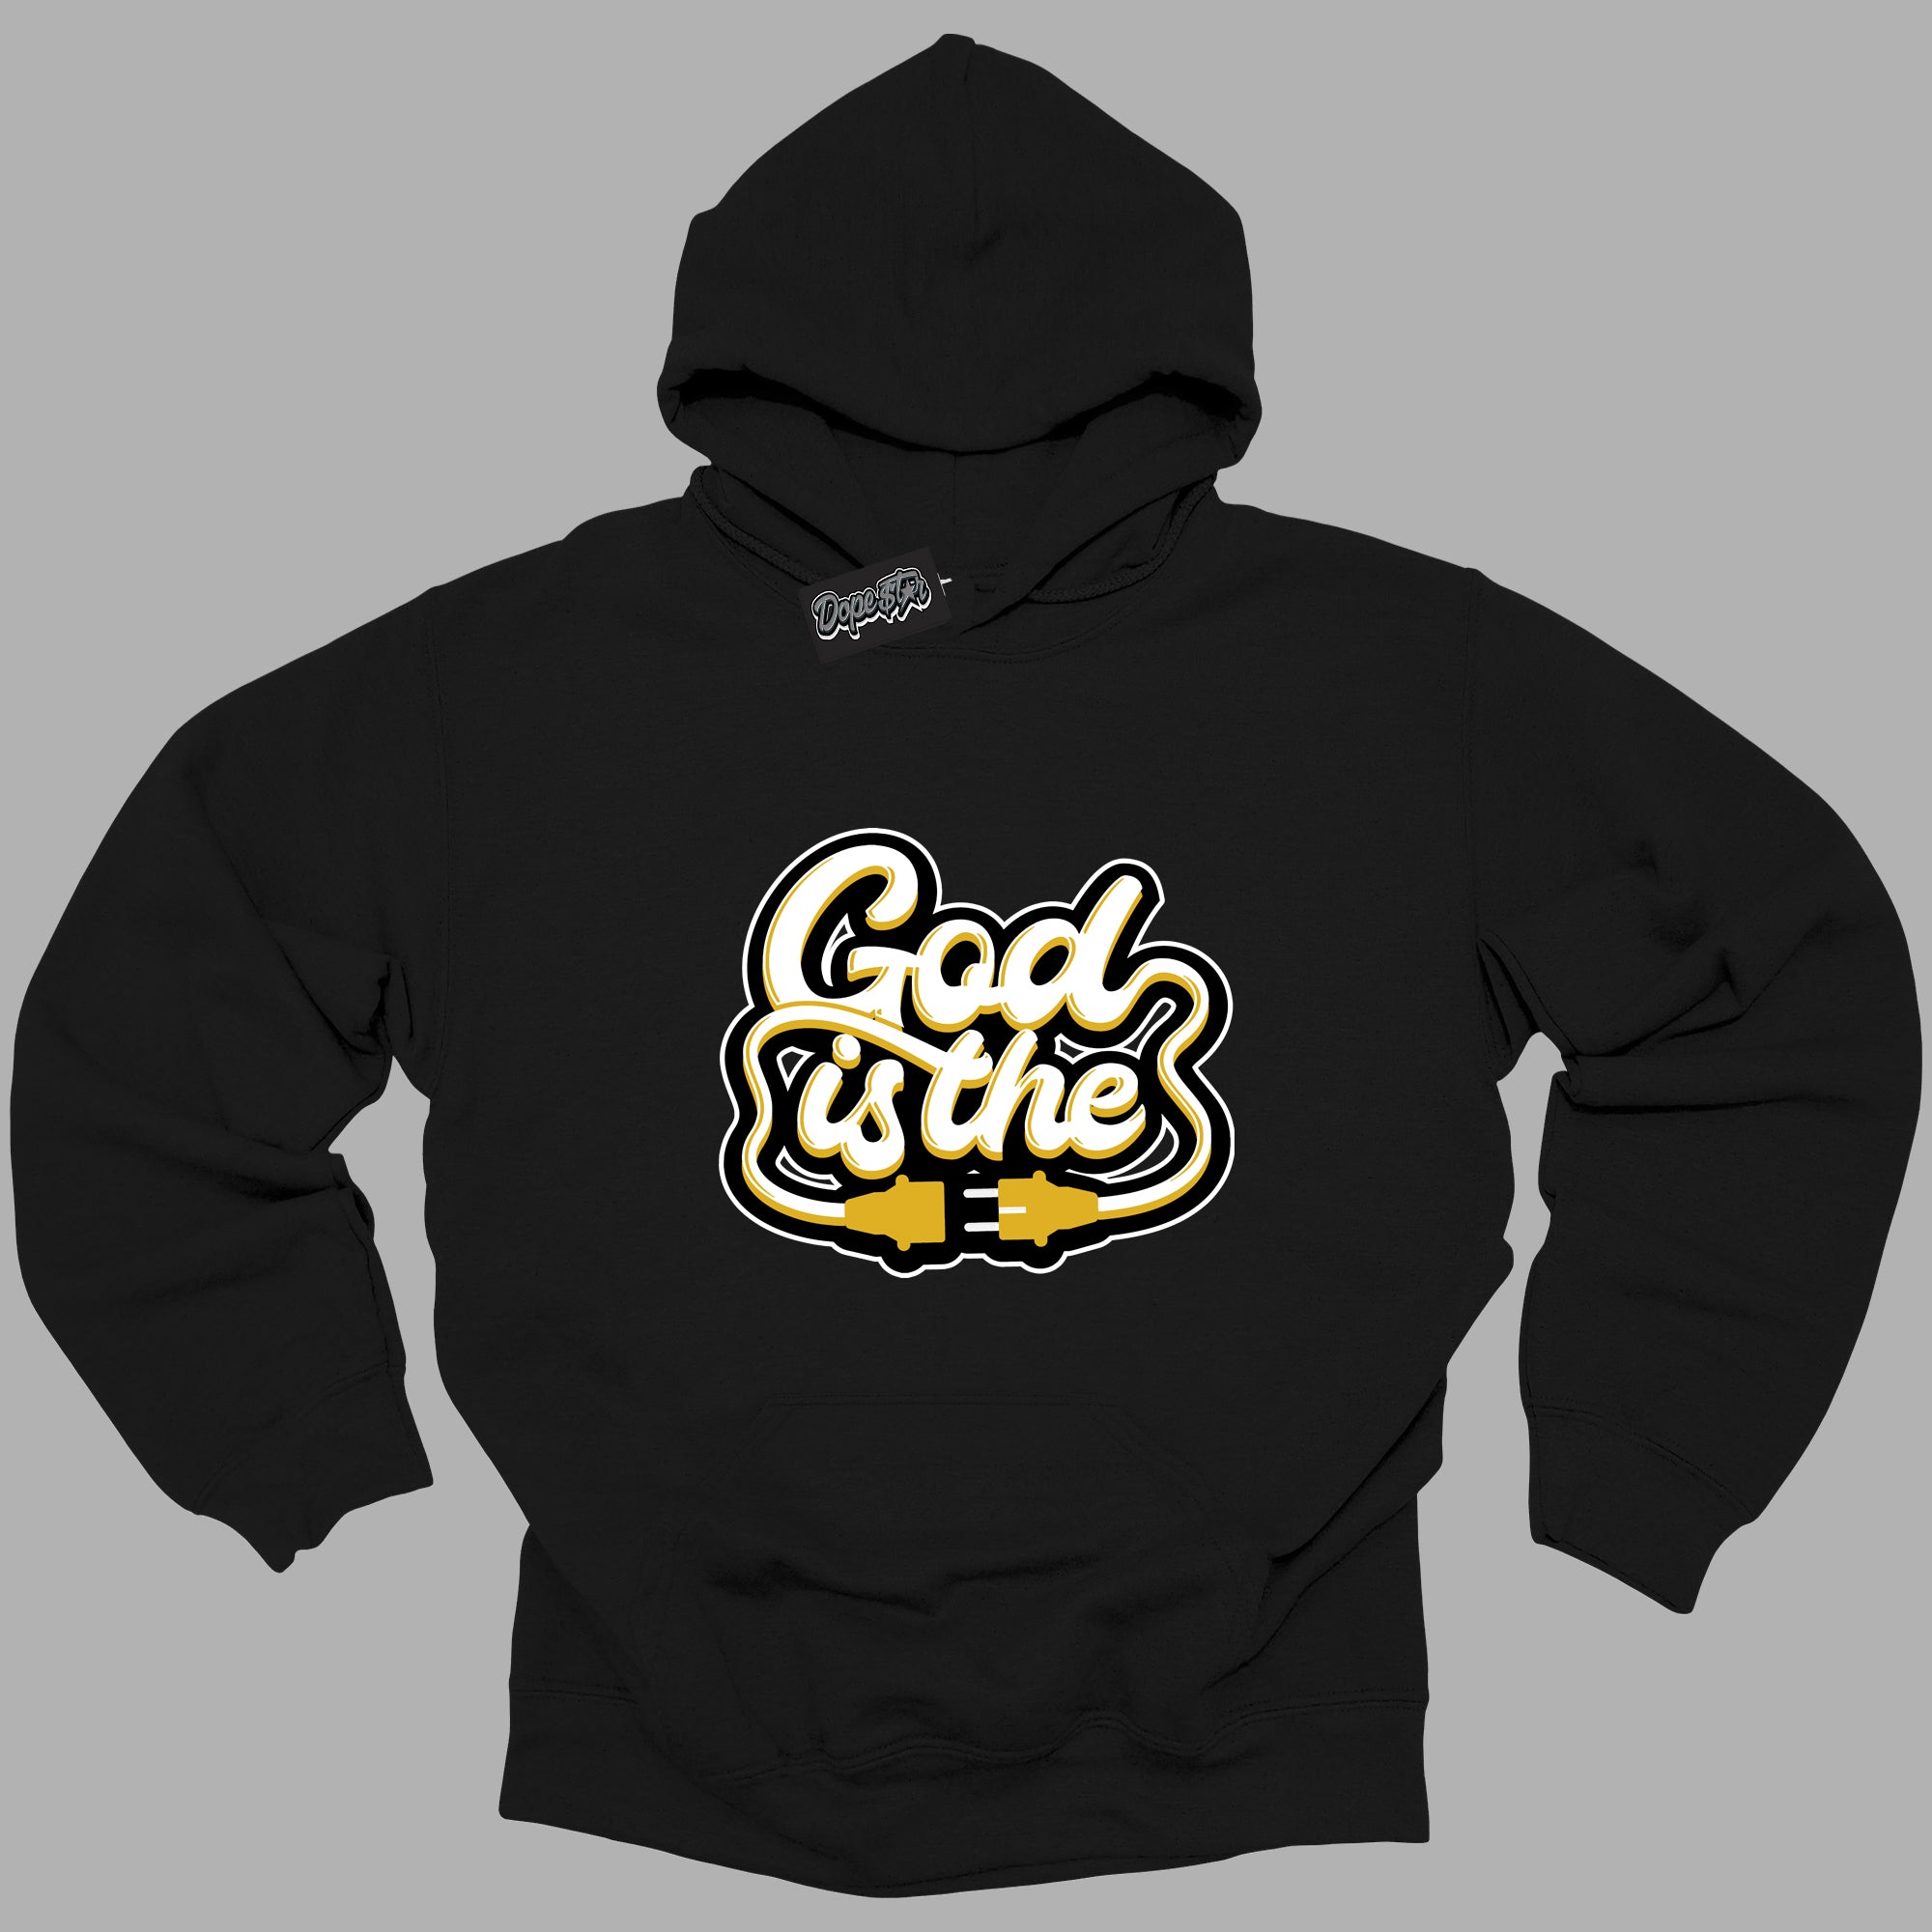 Cool Black Hoodie with “ God Is The ”  design that Perfectly Matches Yellow Ochre 6s Sneakers.